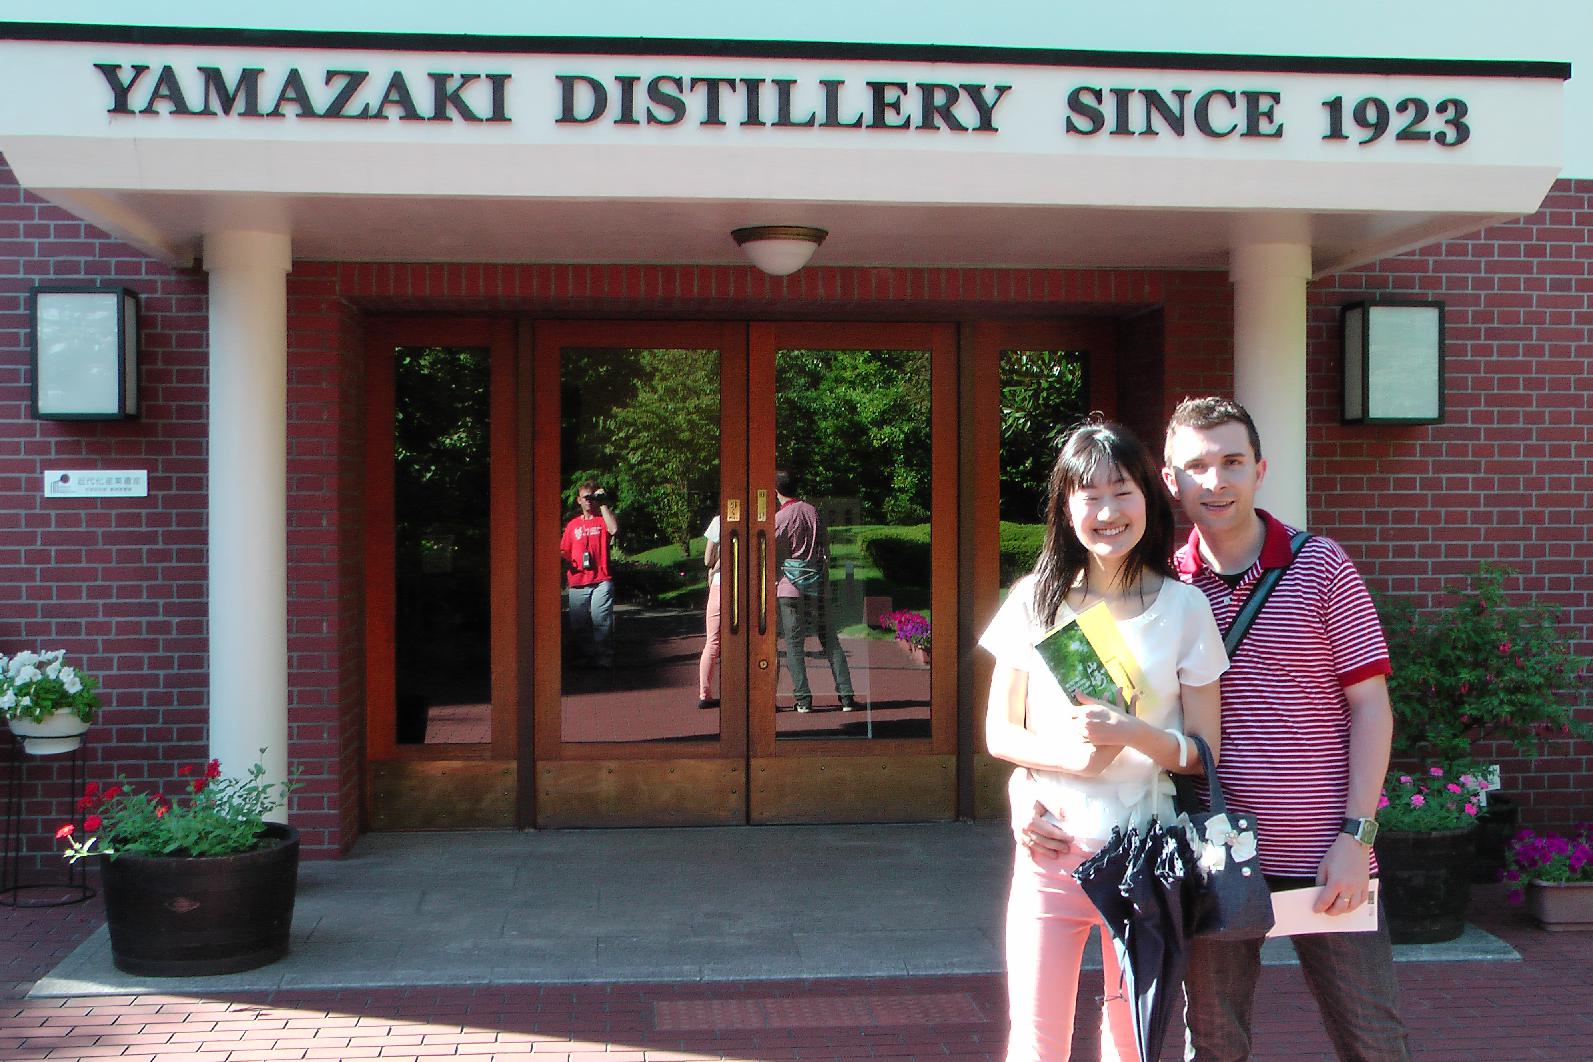 My hosts Kazumi and Andreas in Front of the Yamazaki distillery